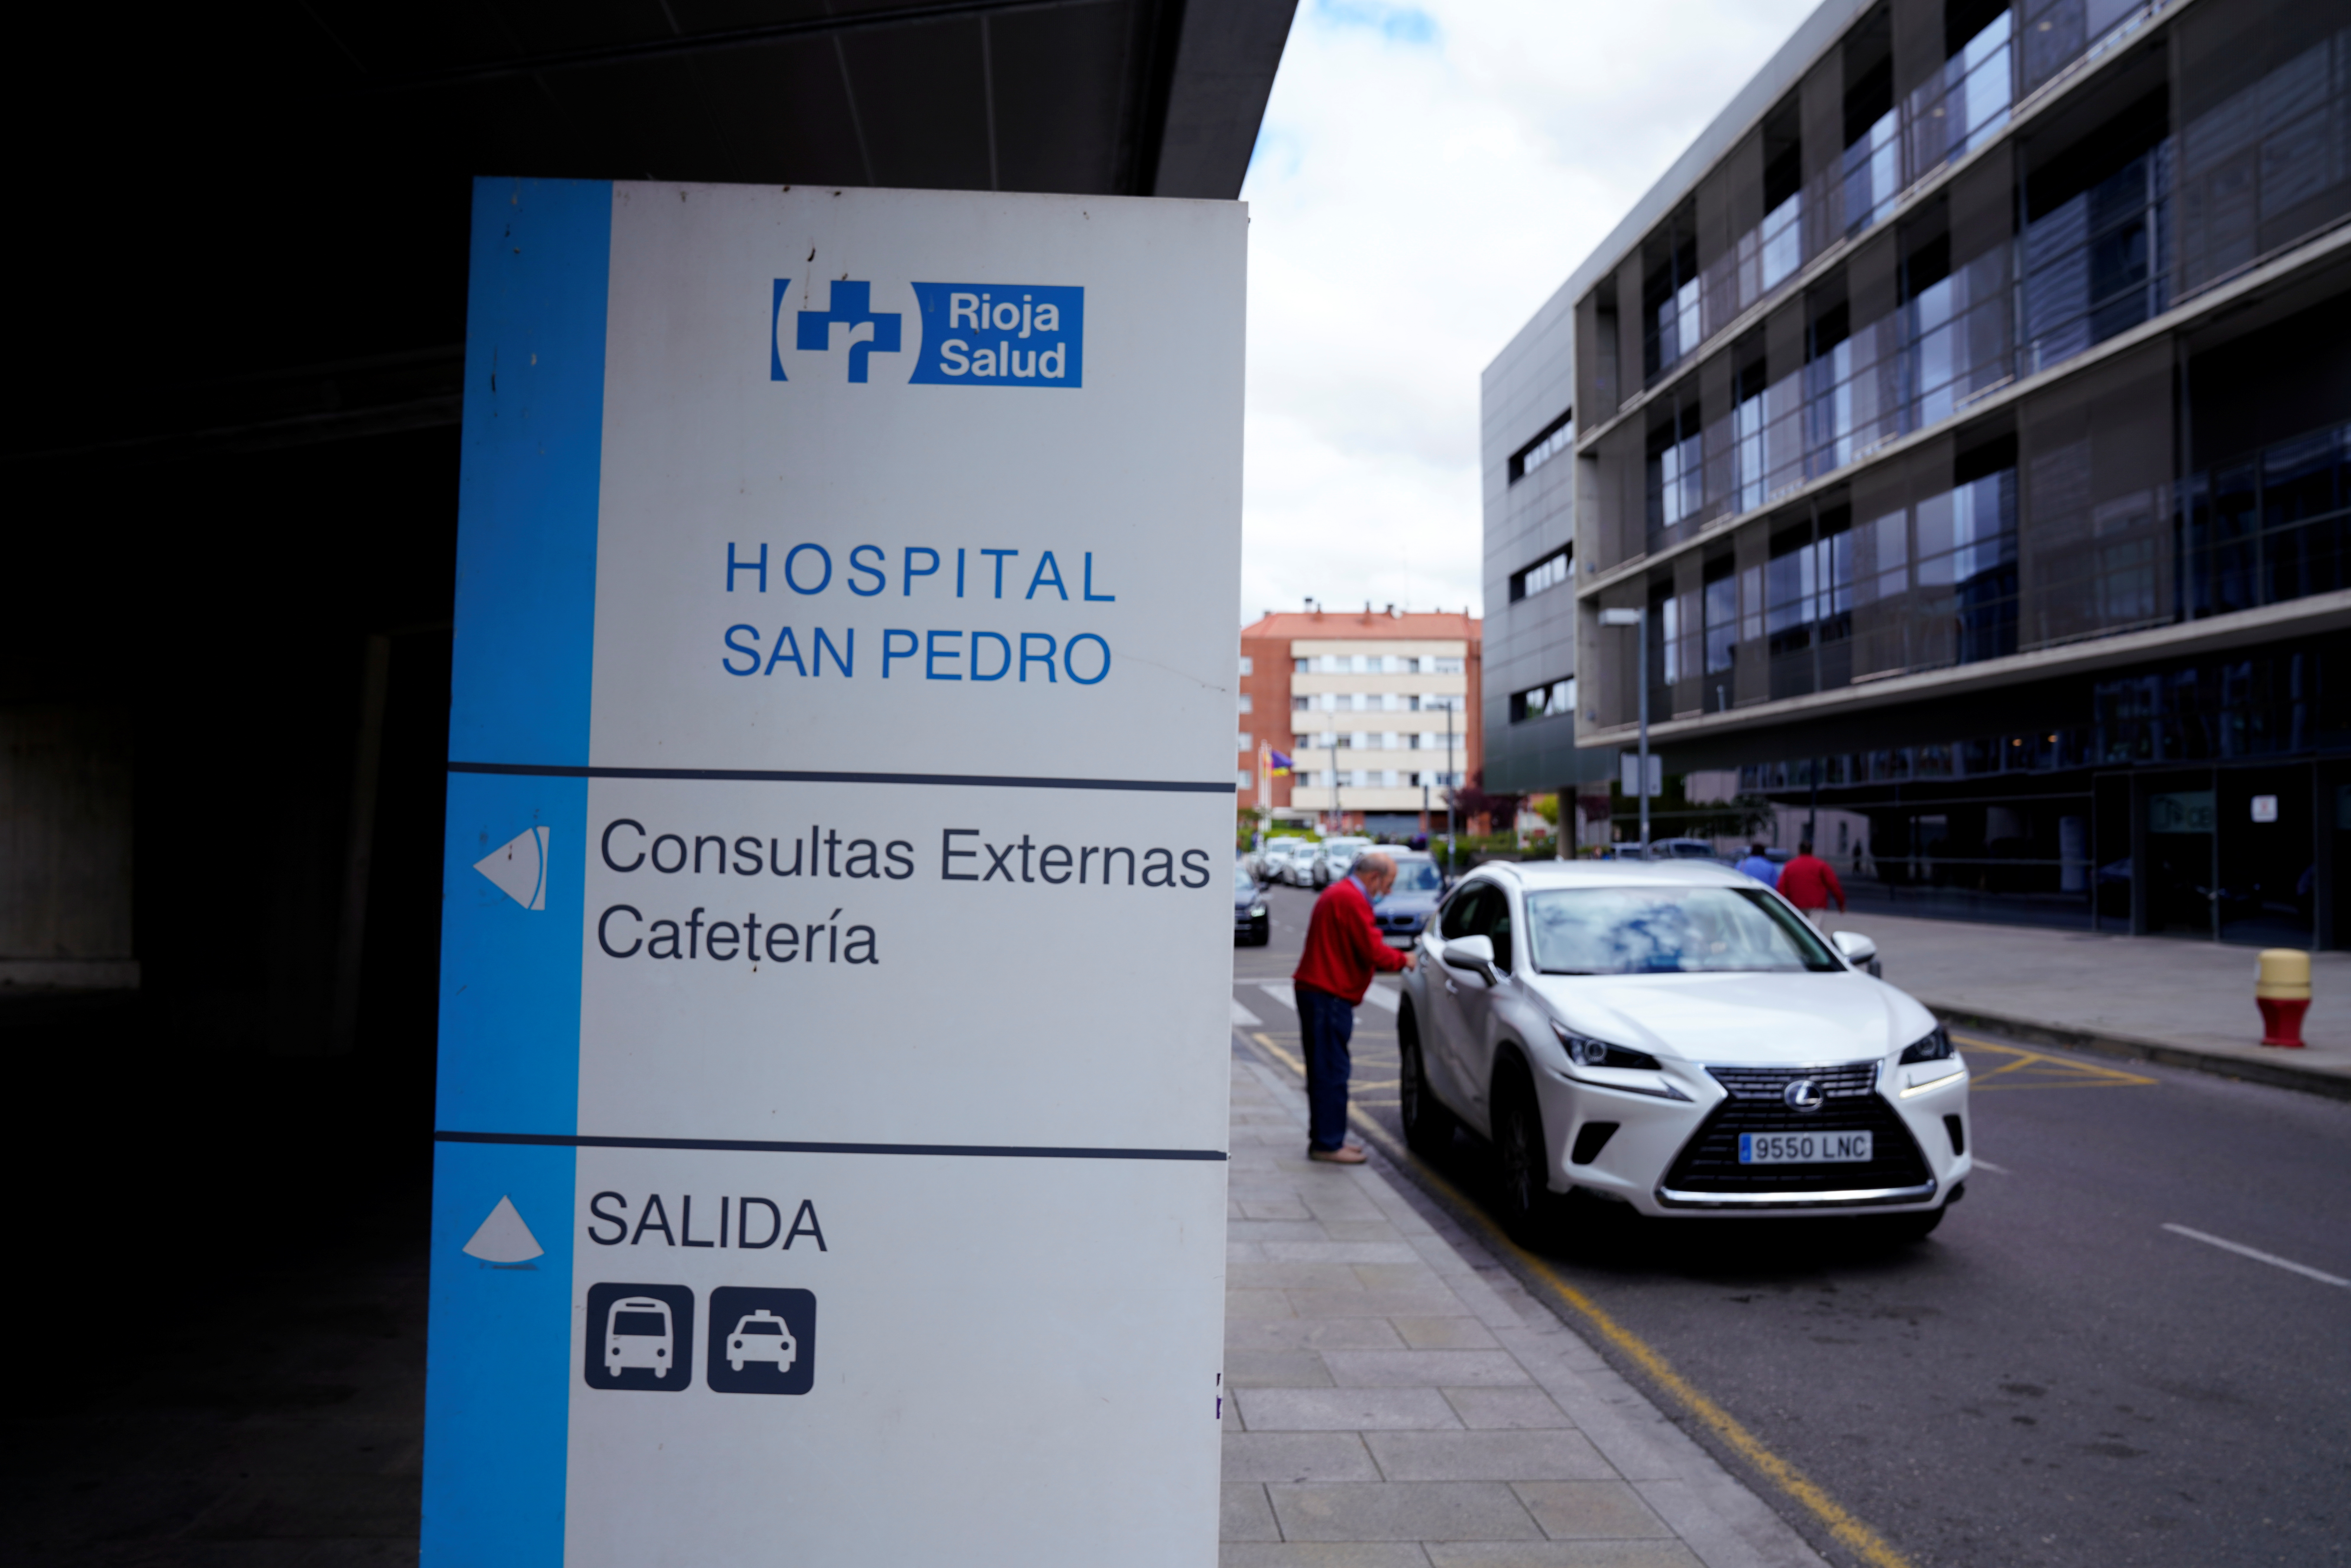 San Pedro hospital where Polisario Front leader is undergoing treatment in Logrono